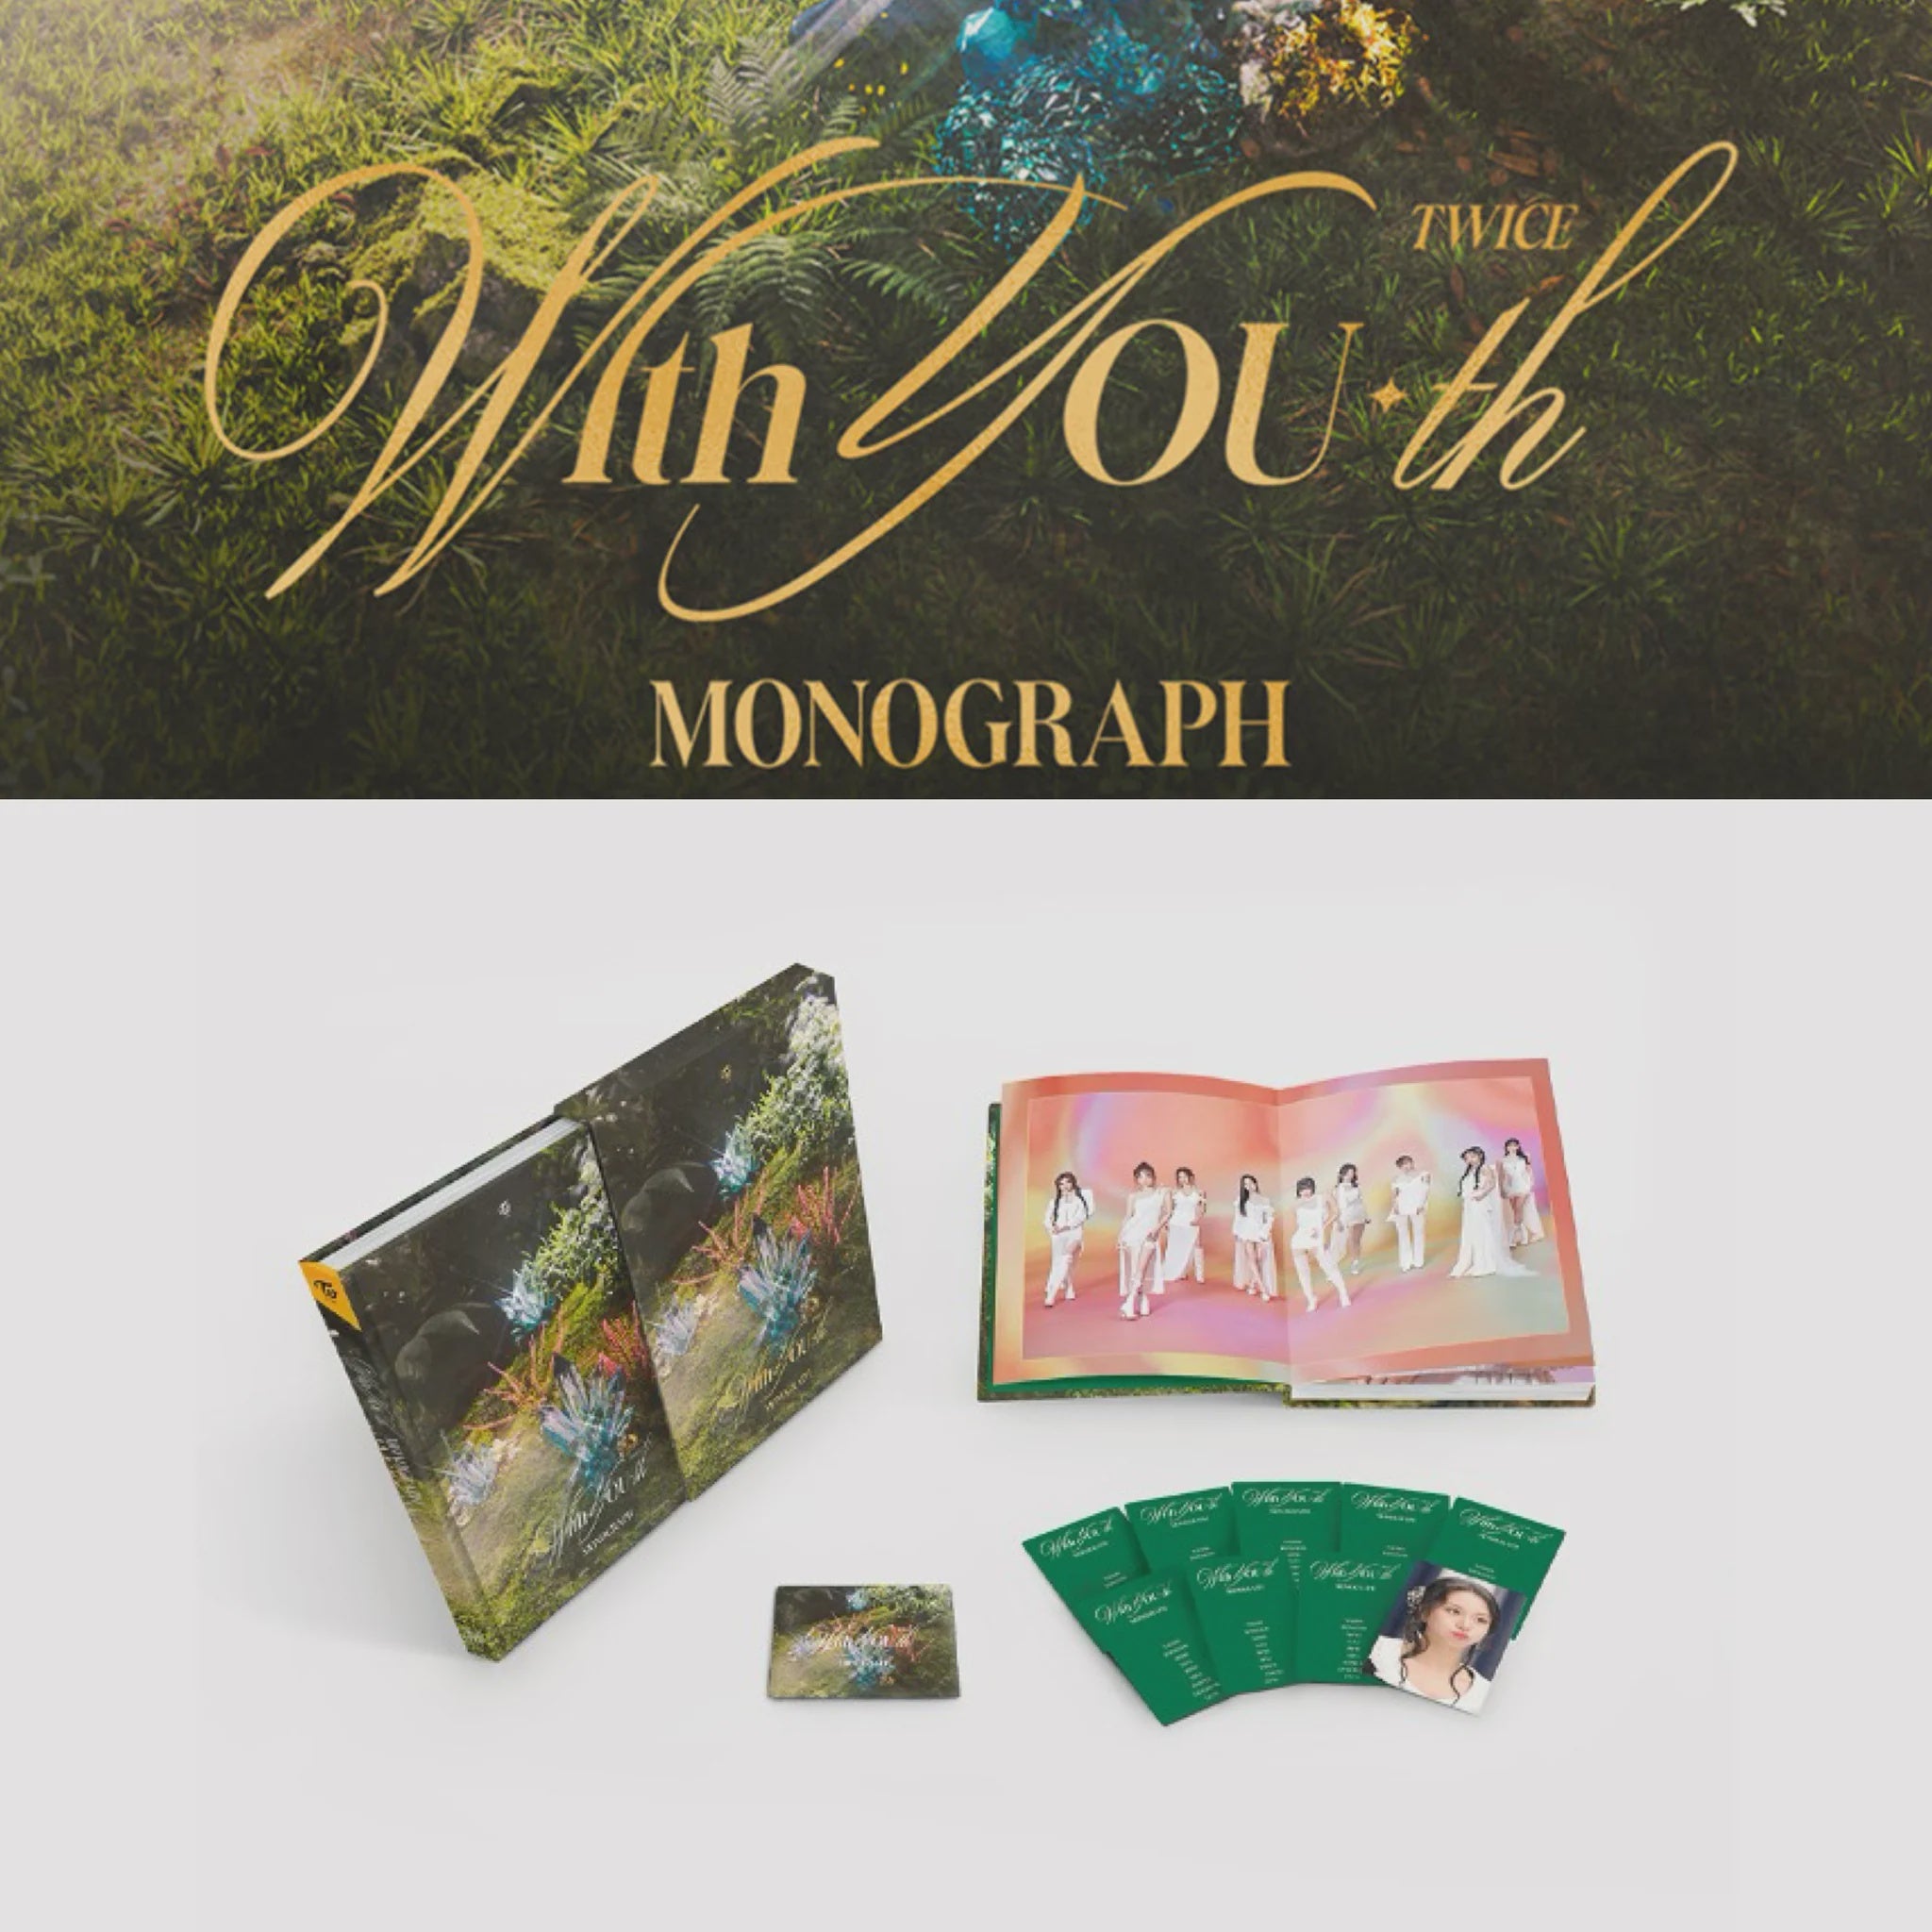 TWICE Monograph WITH YOU-TH